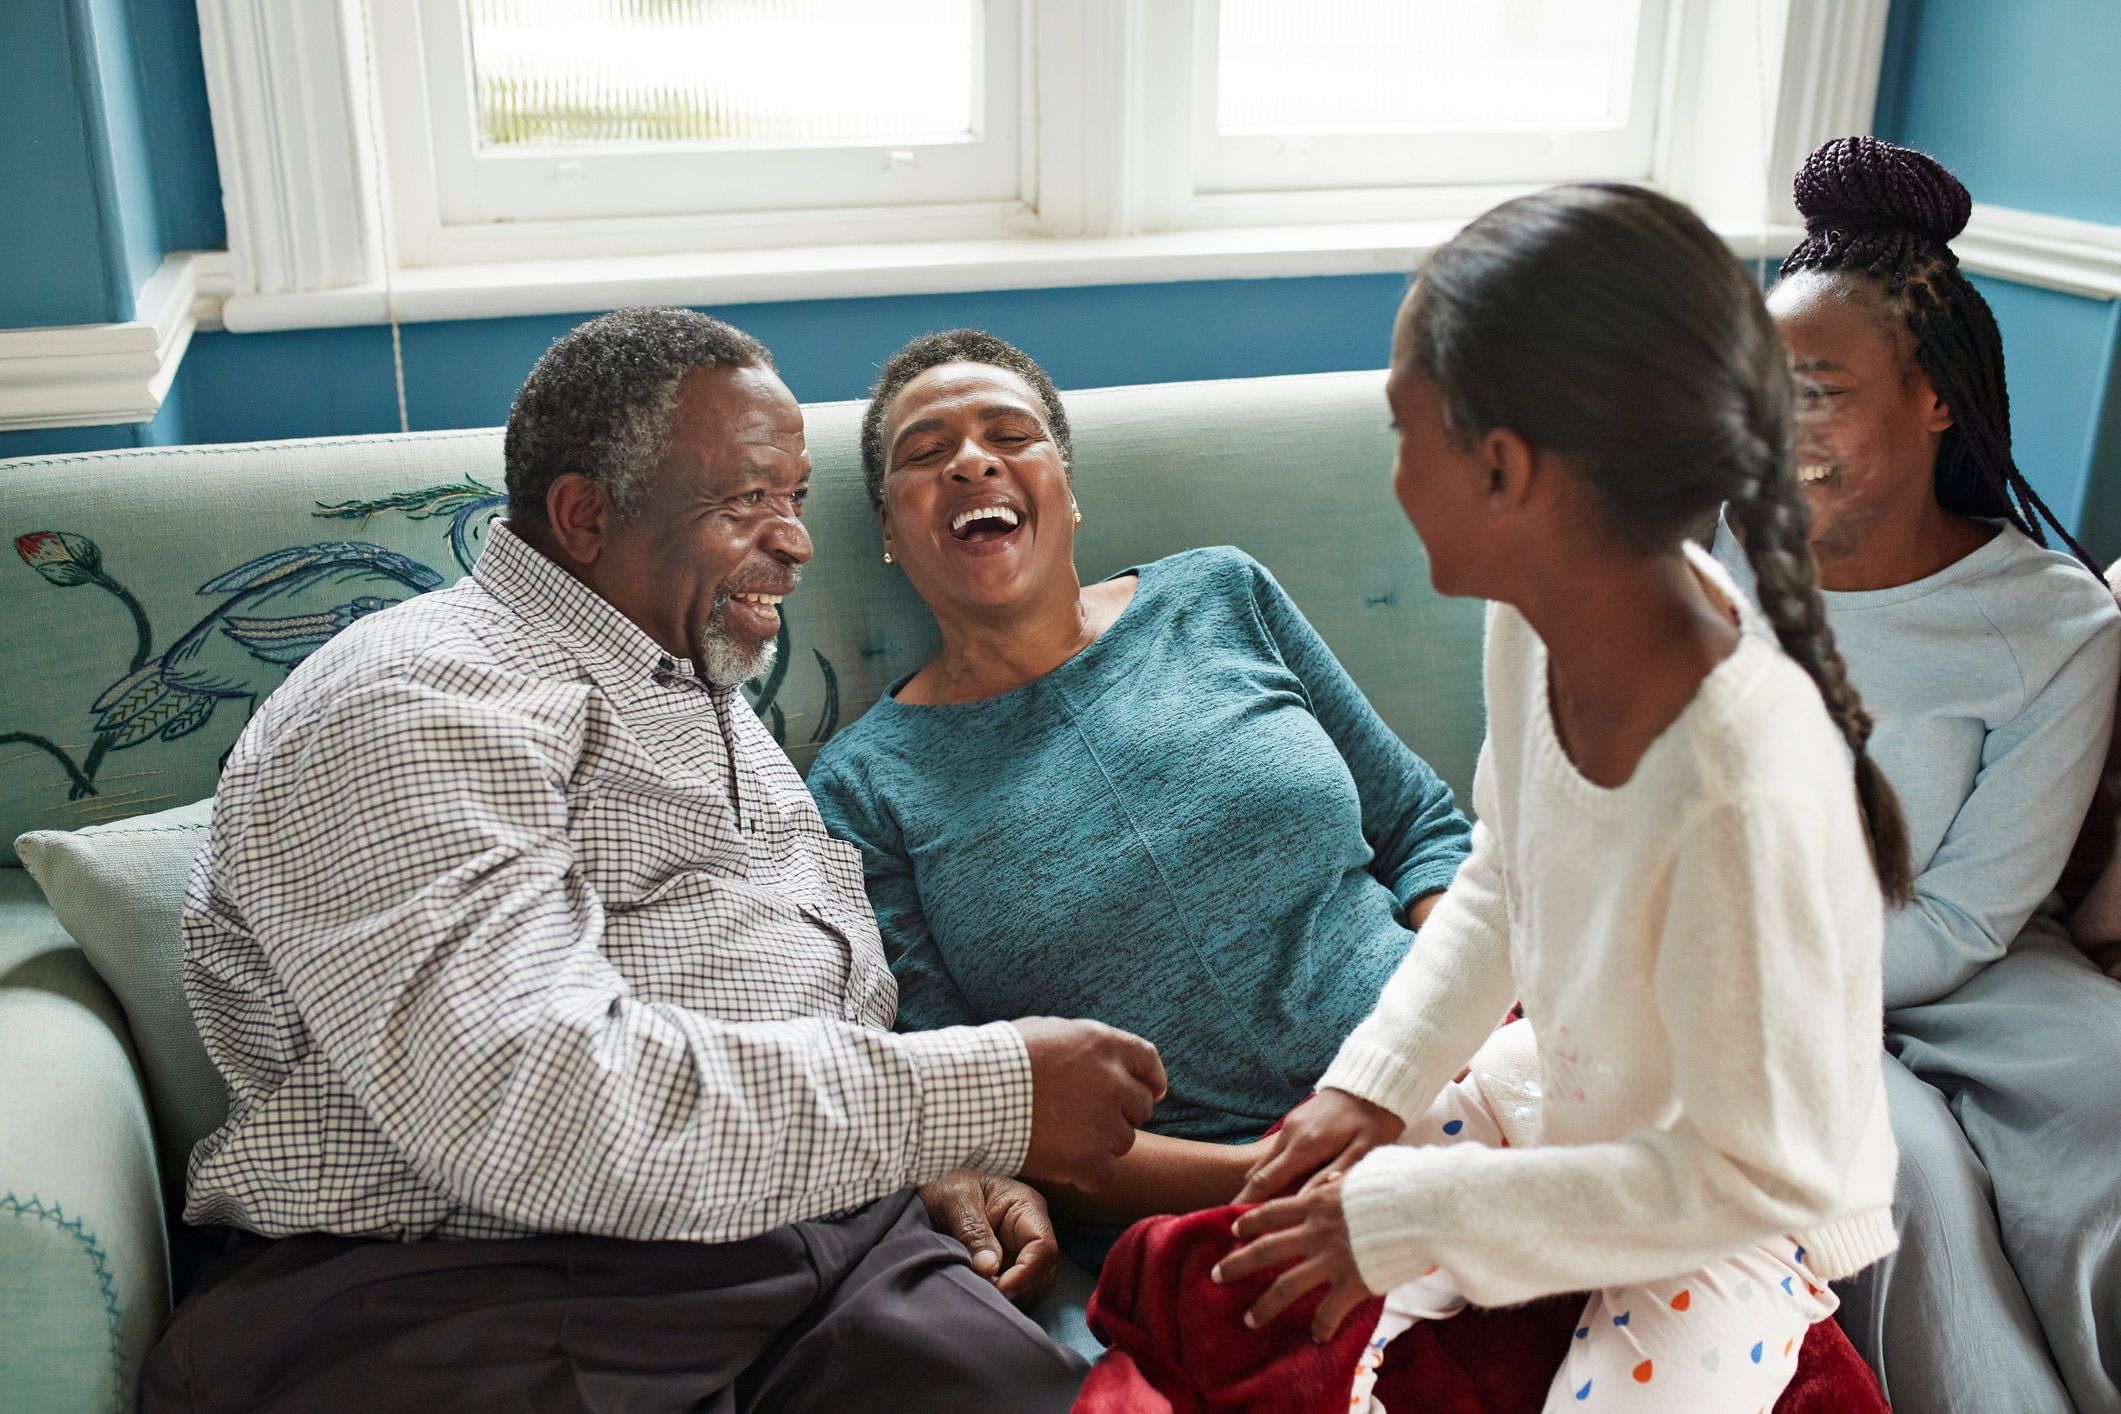 20 questions to ask your parents, grandparents and older loved ones about their lives